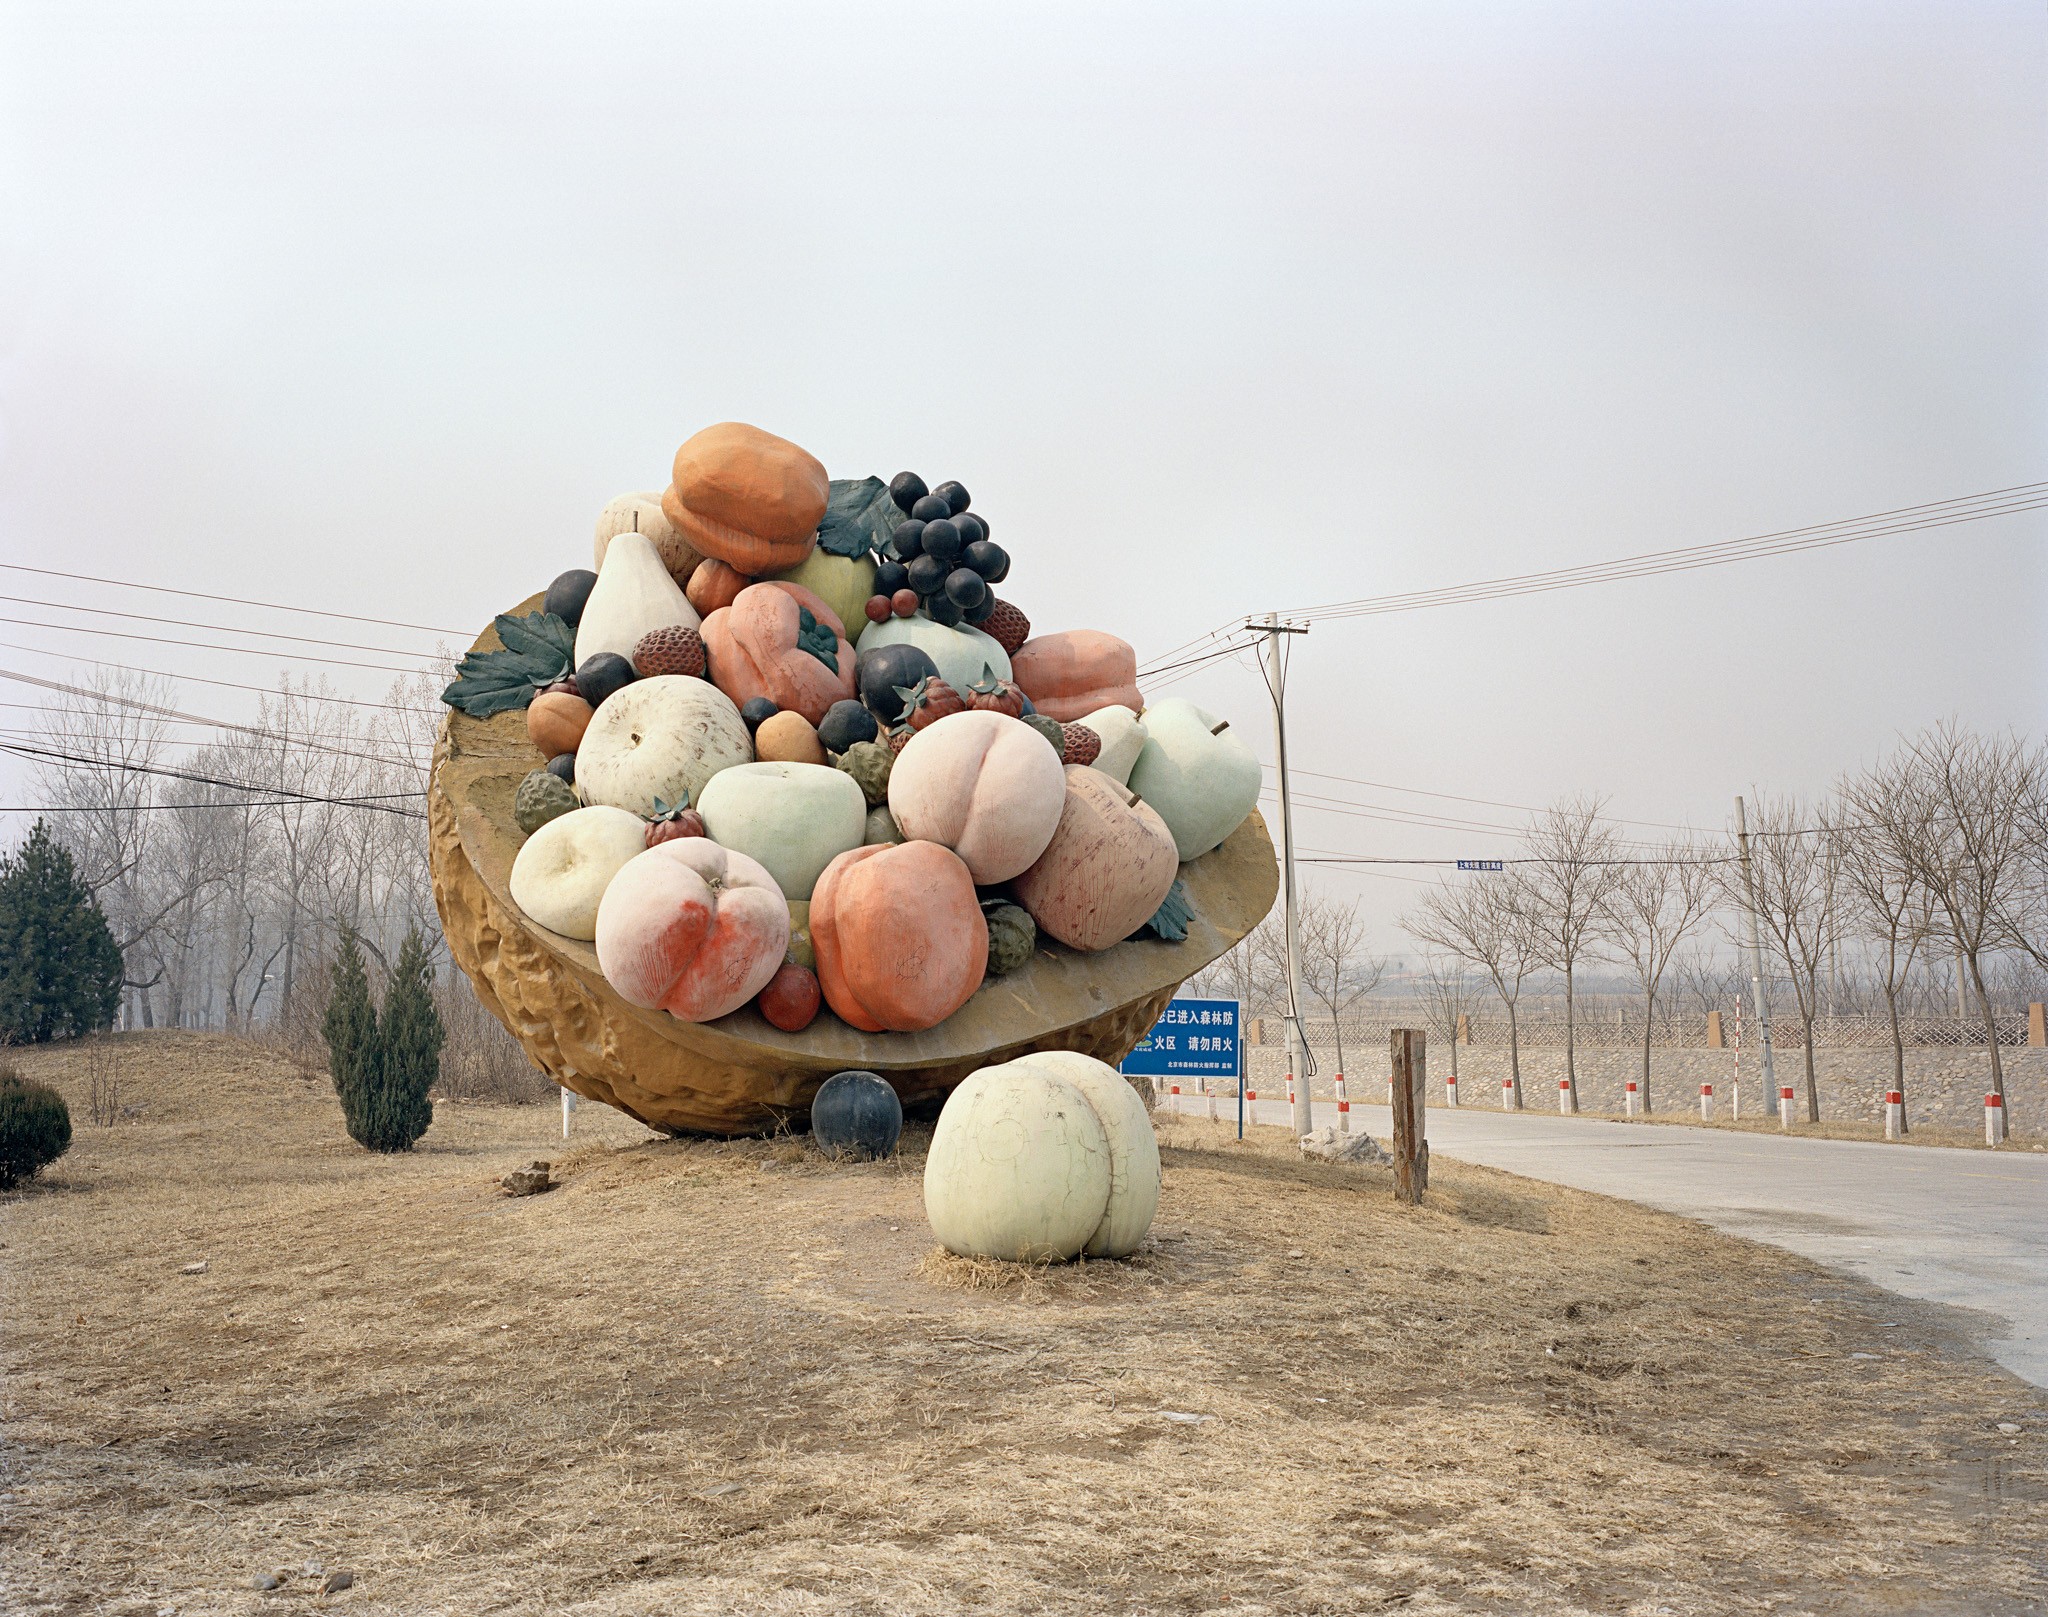 Photo taken in a park in China by famous italian photographer Stefano CERIO. We can see a giant basket fruit in the middle of a desertic landscape.